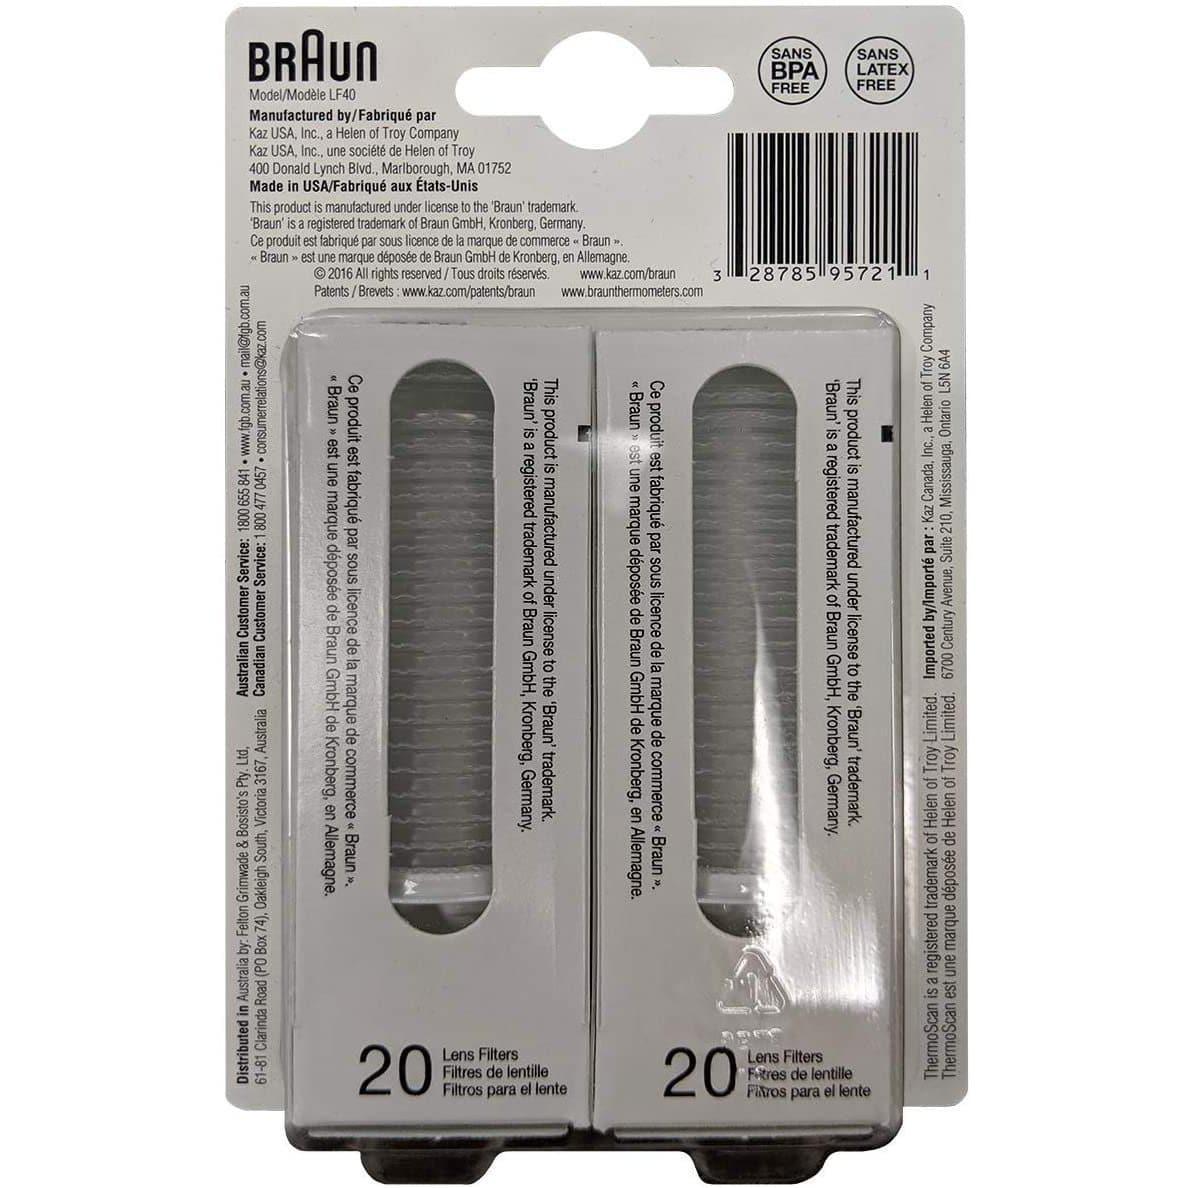 Braun LF40 ThermoScan Lens Filter Refills for Ear Thermometers--Pack of 40 - Healthxpress.ie